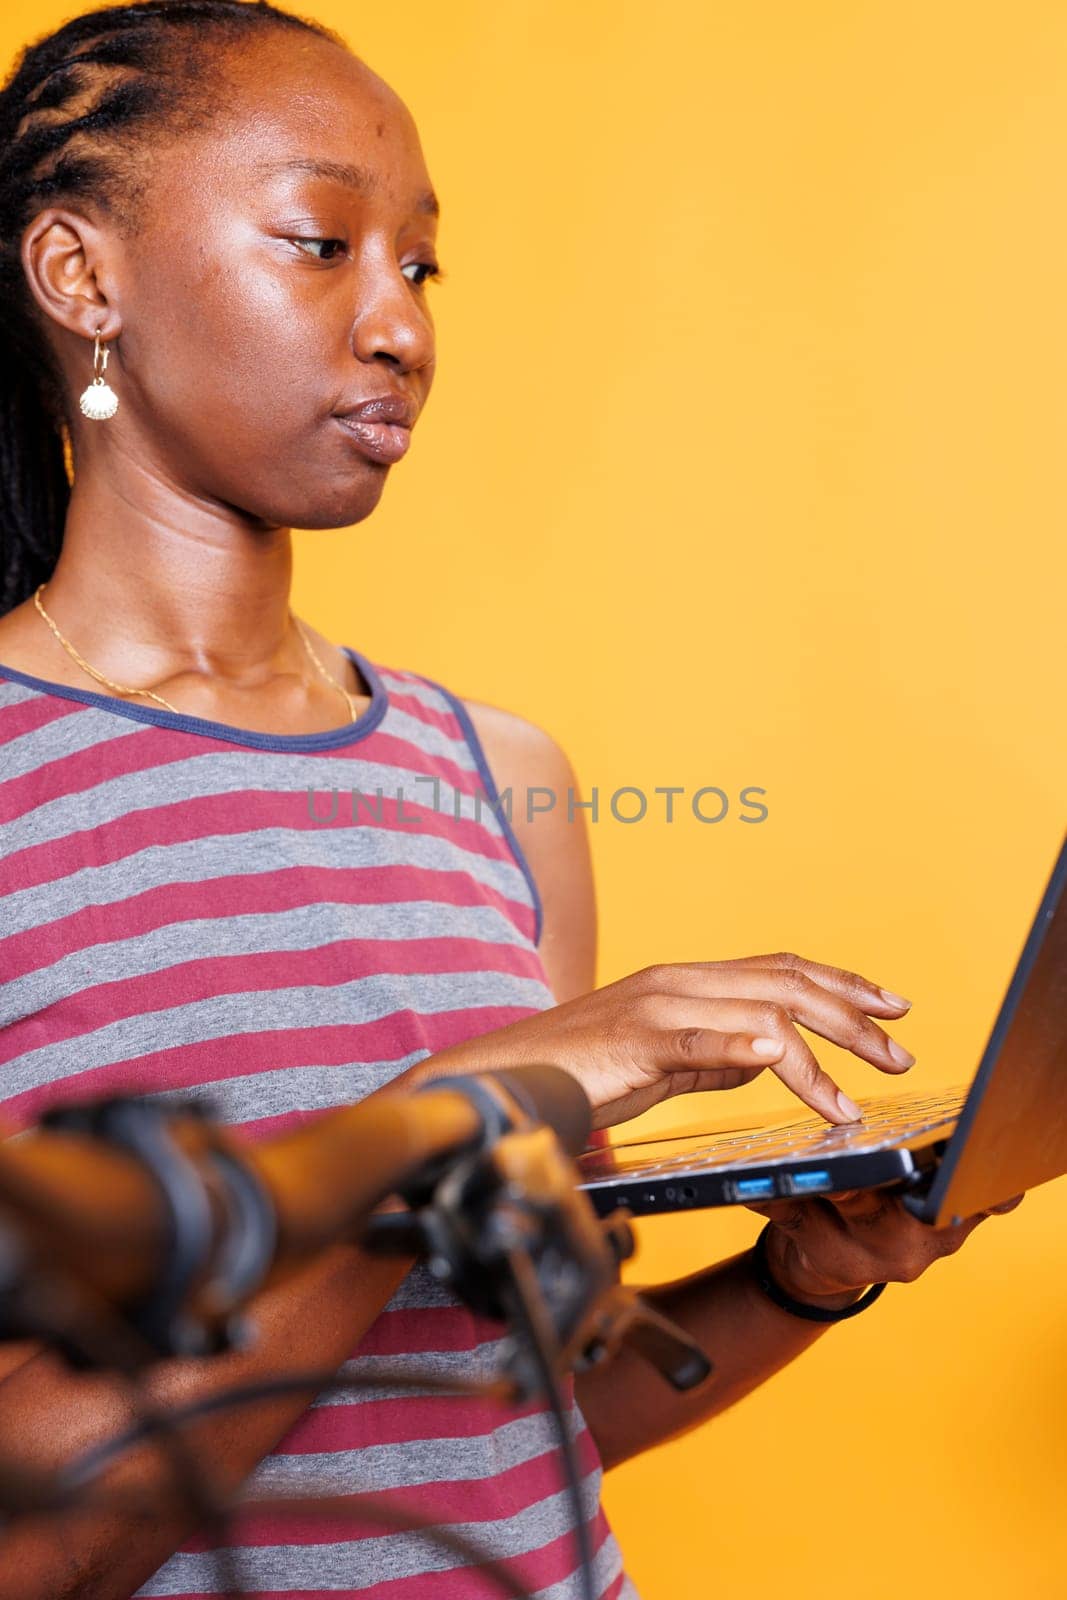 Dedicated young lady engrossed in inspecting and servicing bicycle with laptop. African American woman resolves broken bike with digital pc, ensuring safety and functionality. Close up shot.